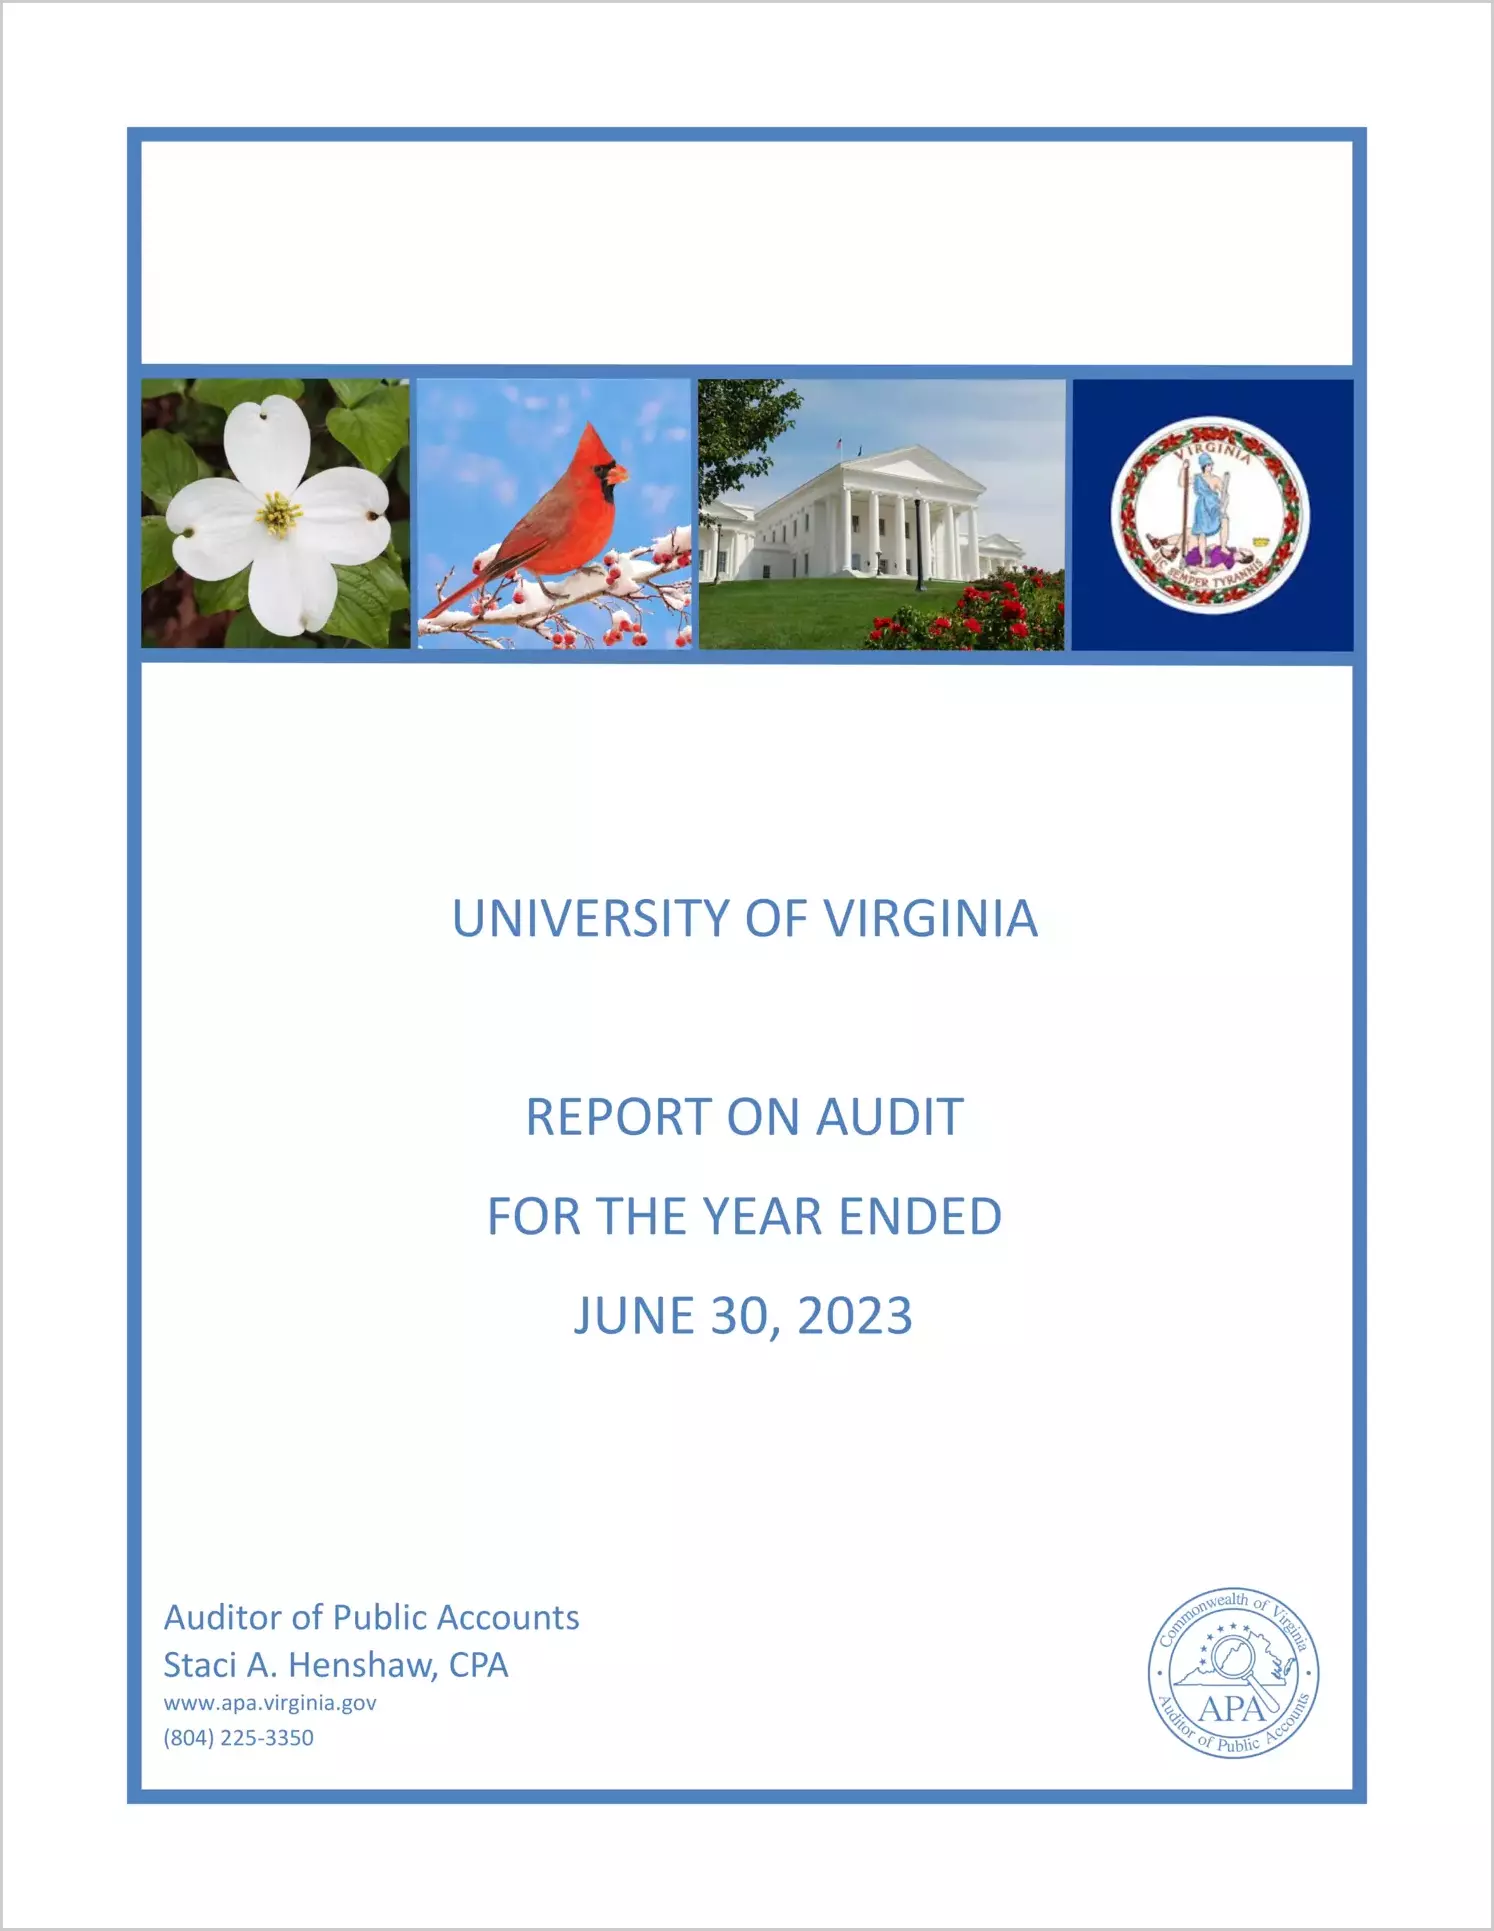 University of Virginia for the year ended June 30, 2023